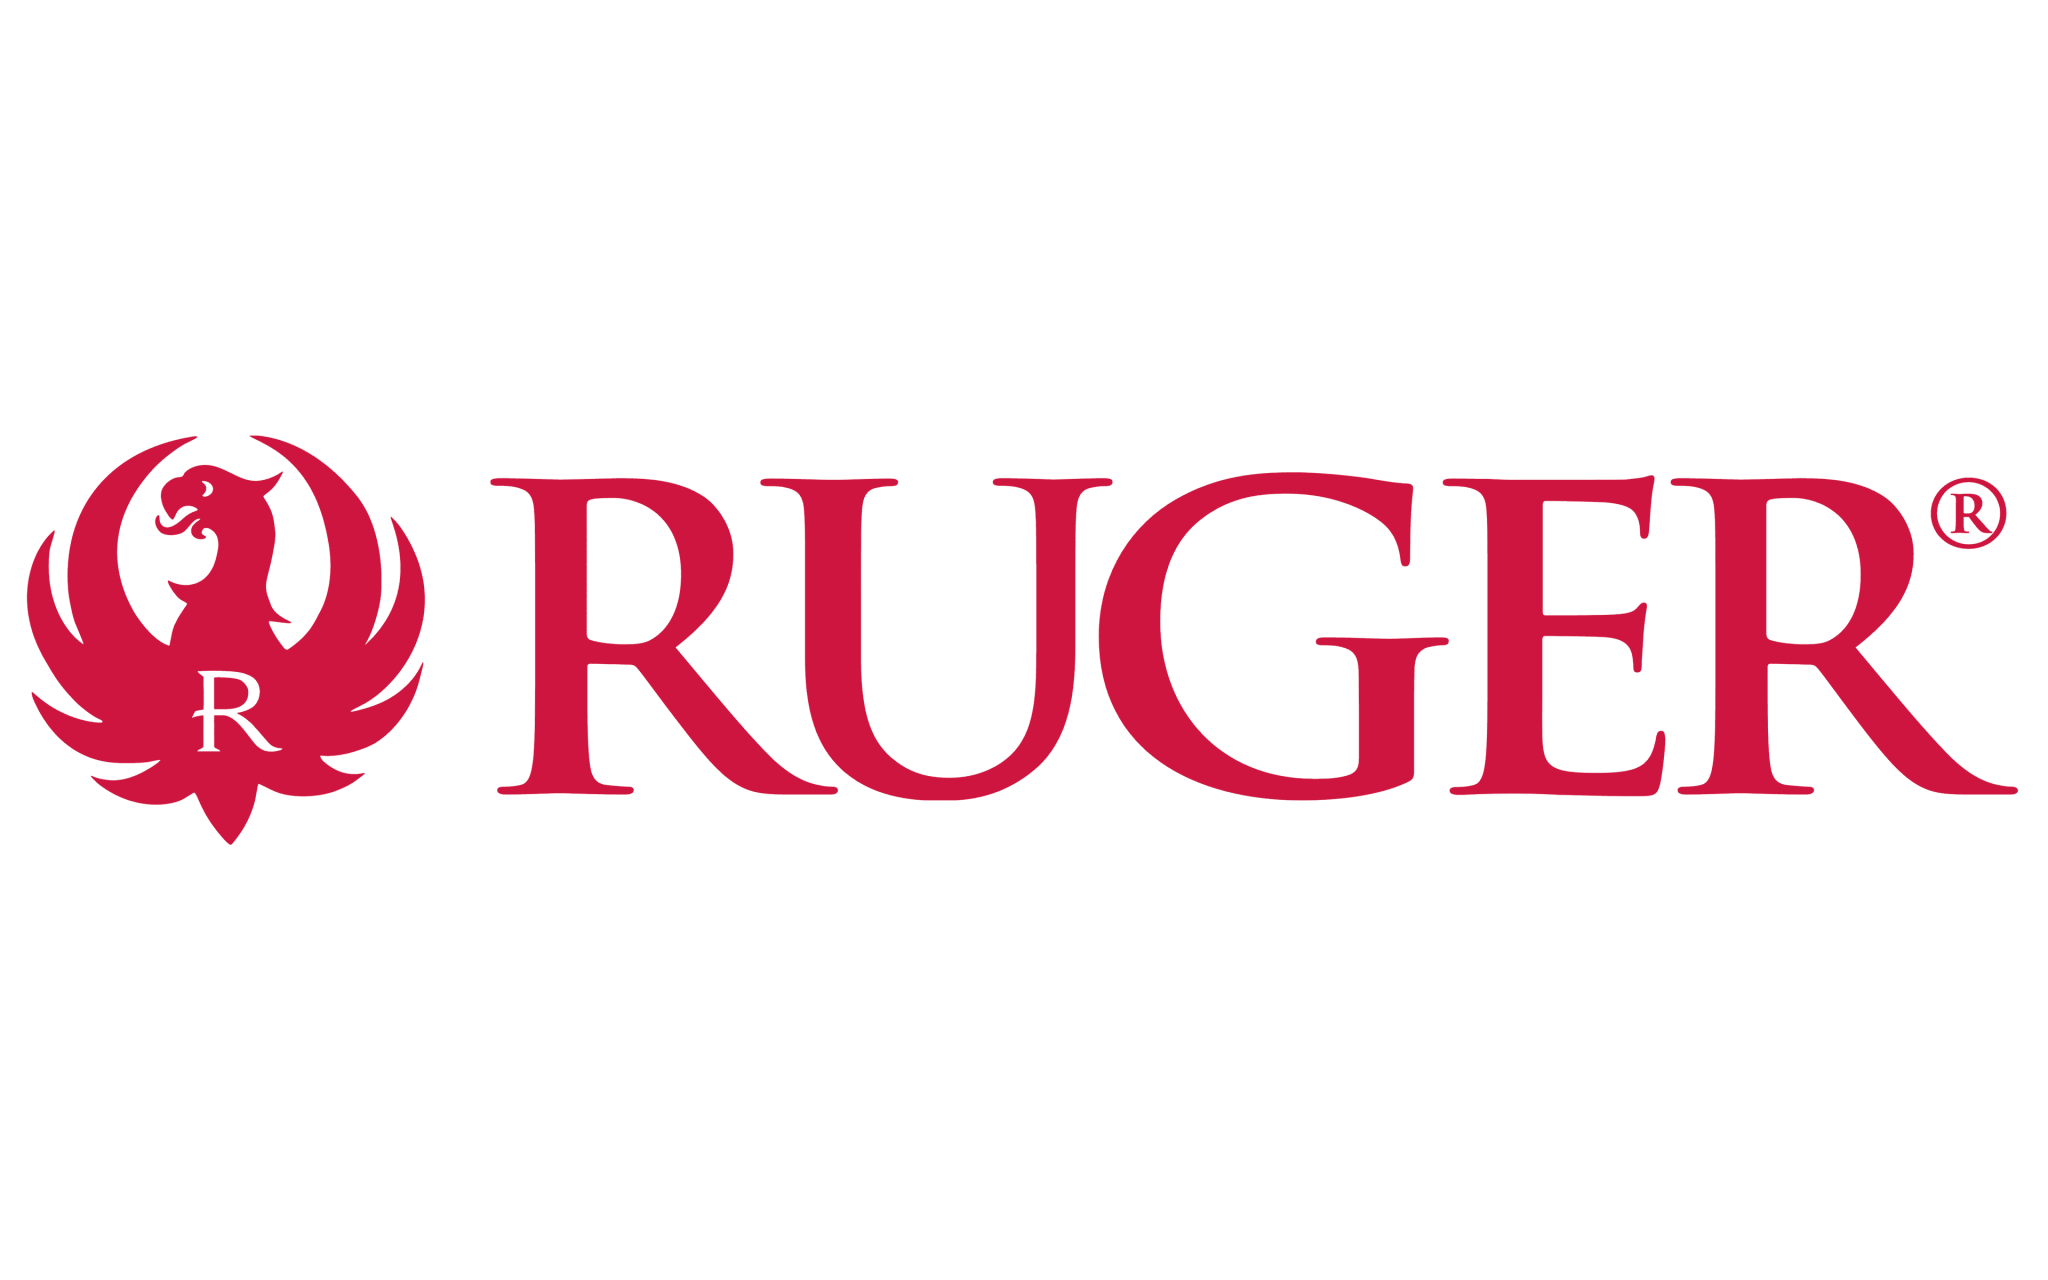 Ruger Logo And Symbol Meaning History Png